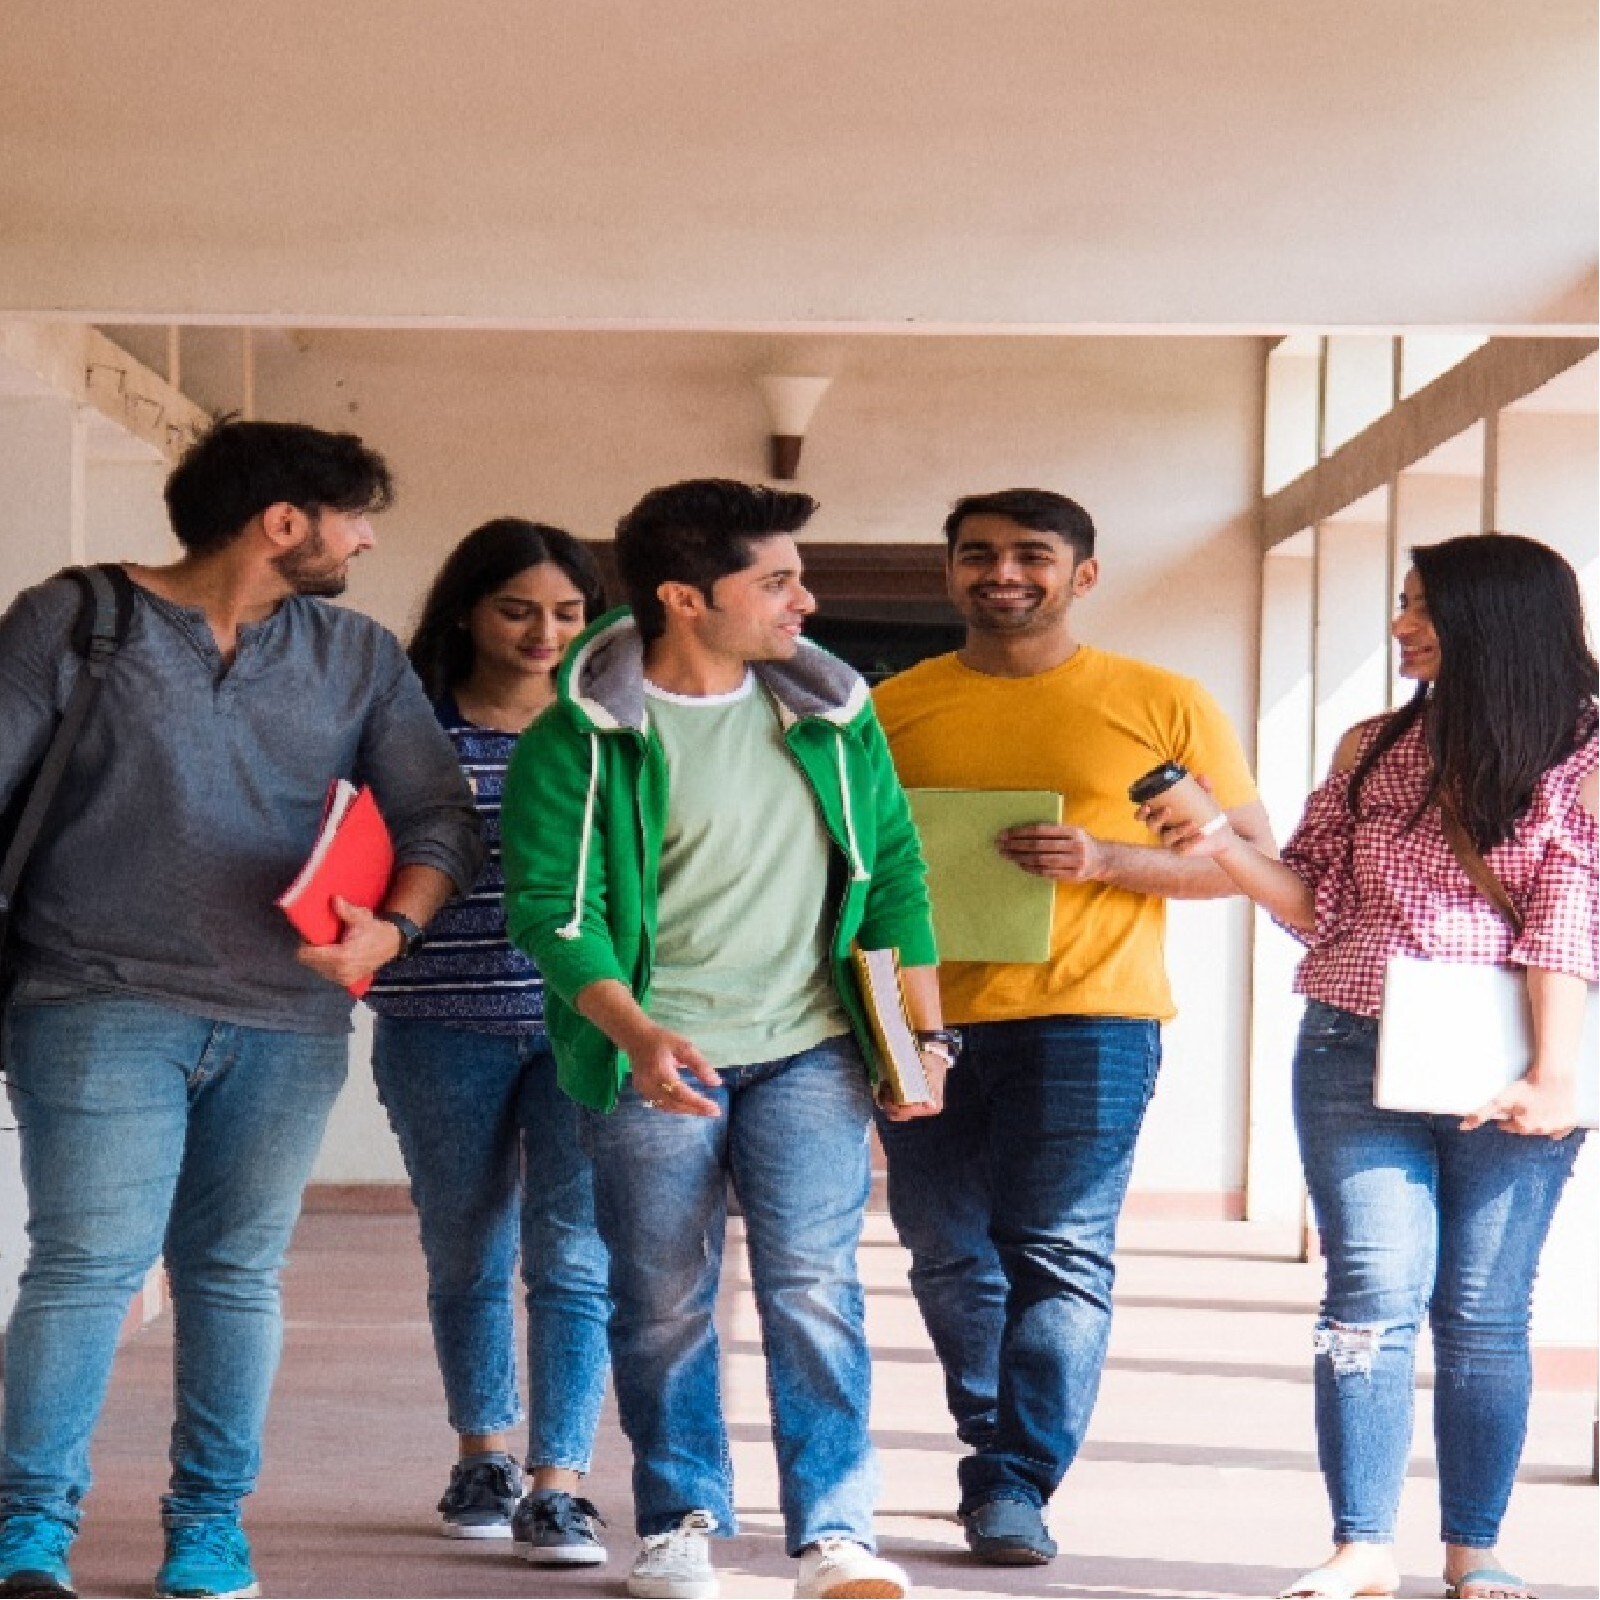 No JEE Main Score needed, IITs New Courses For Academic Year 2021